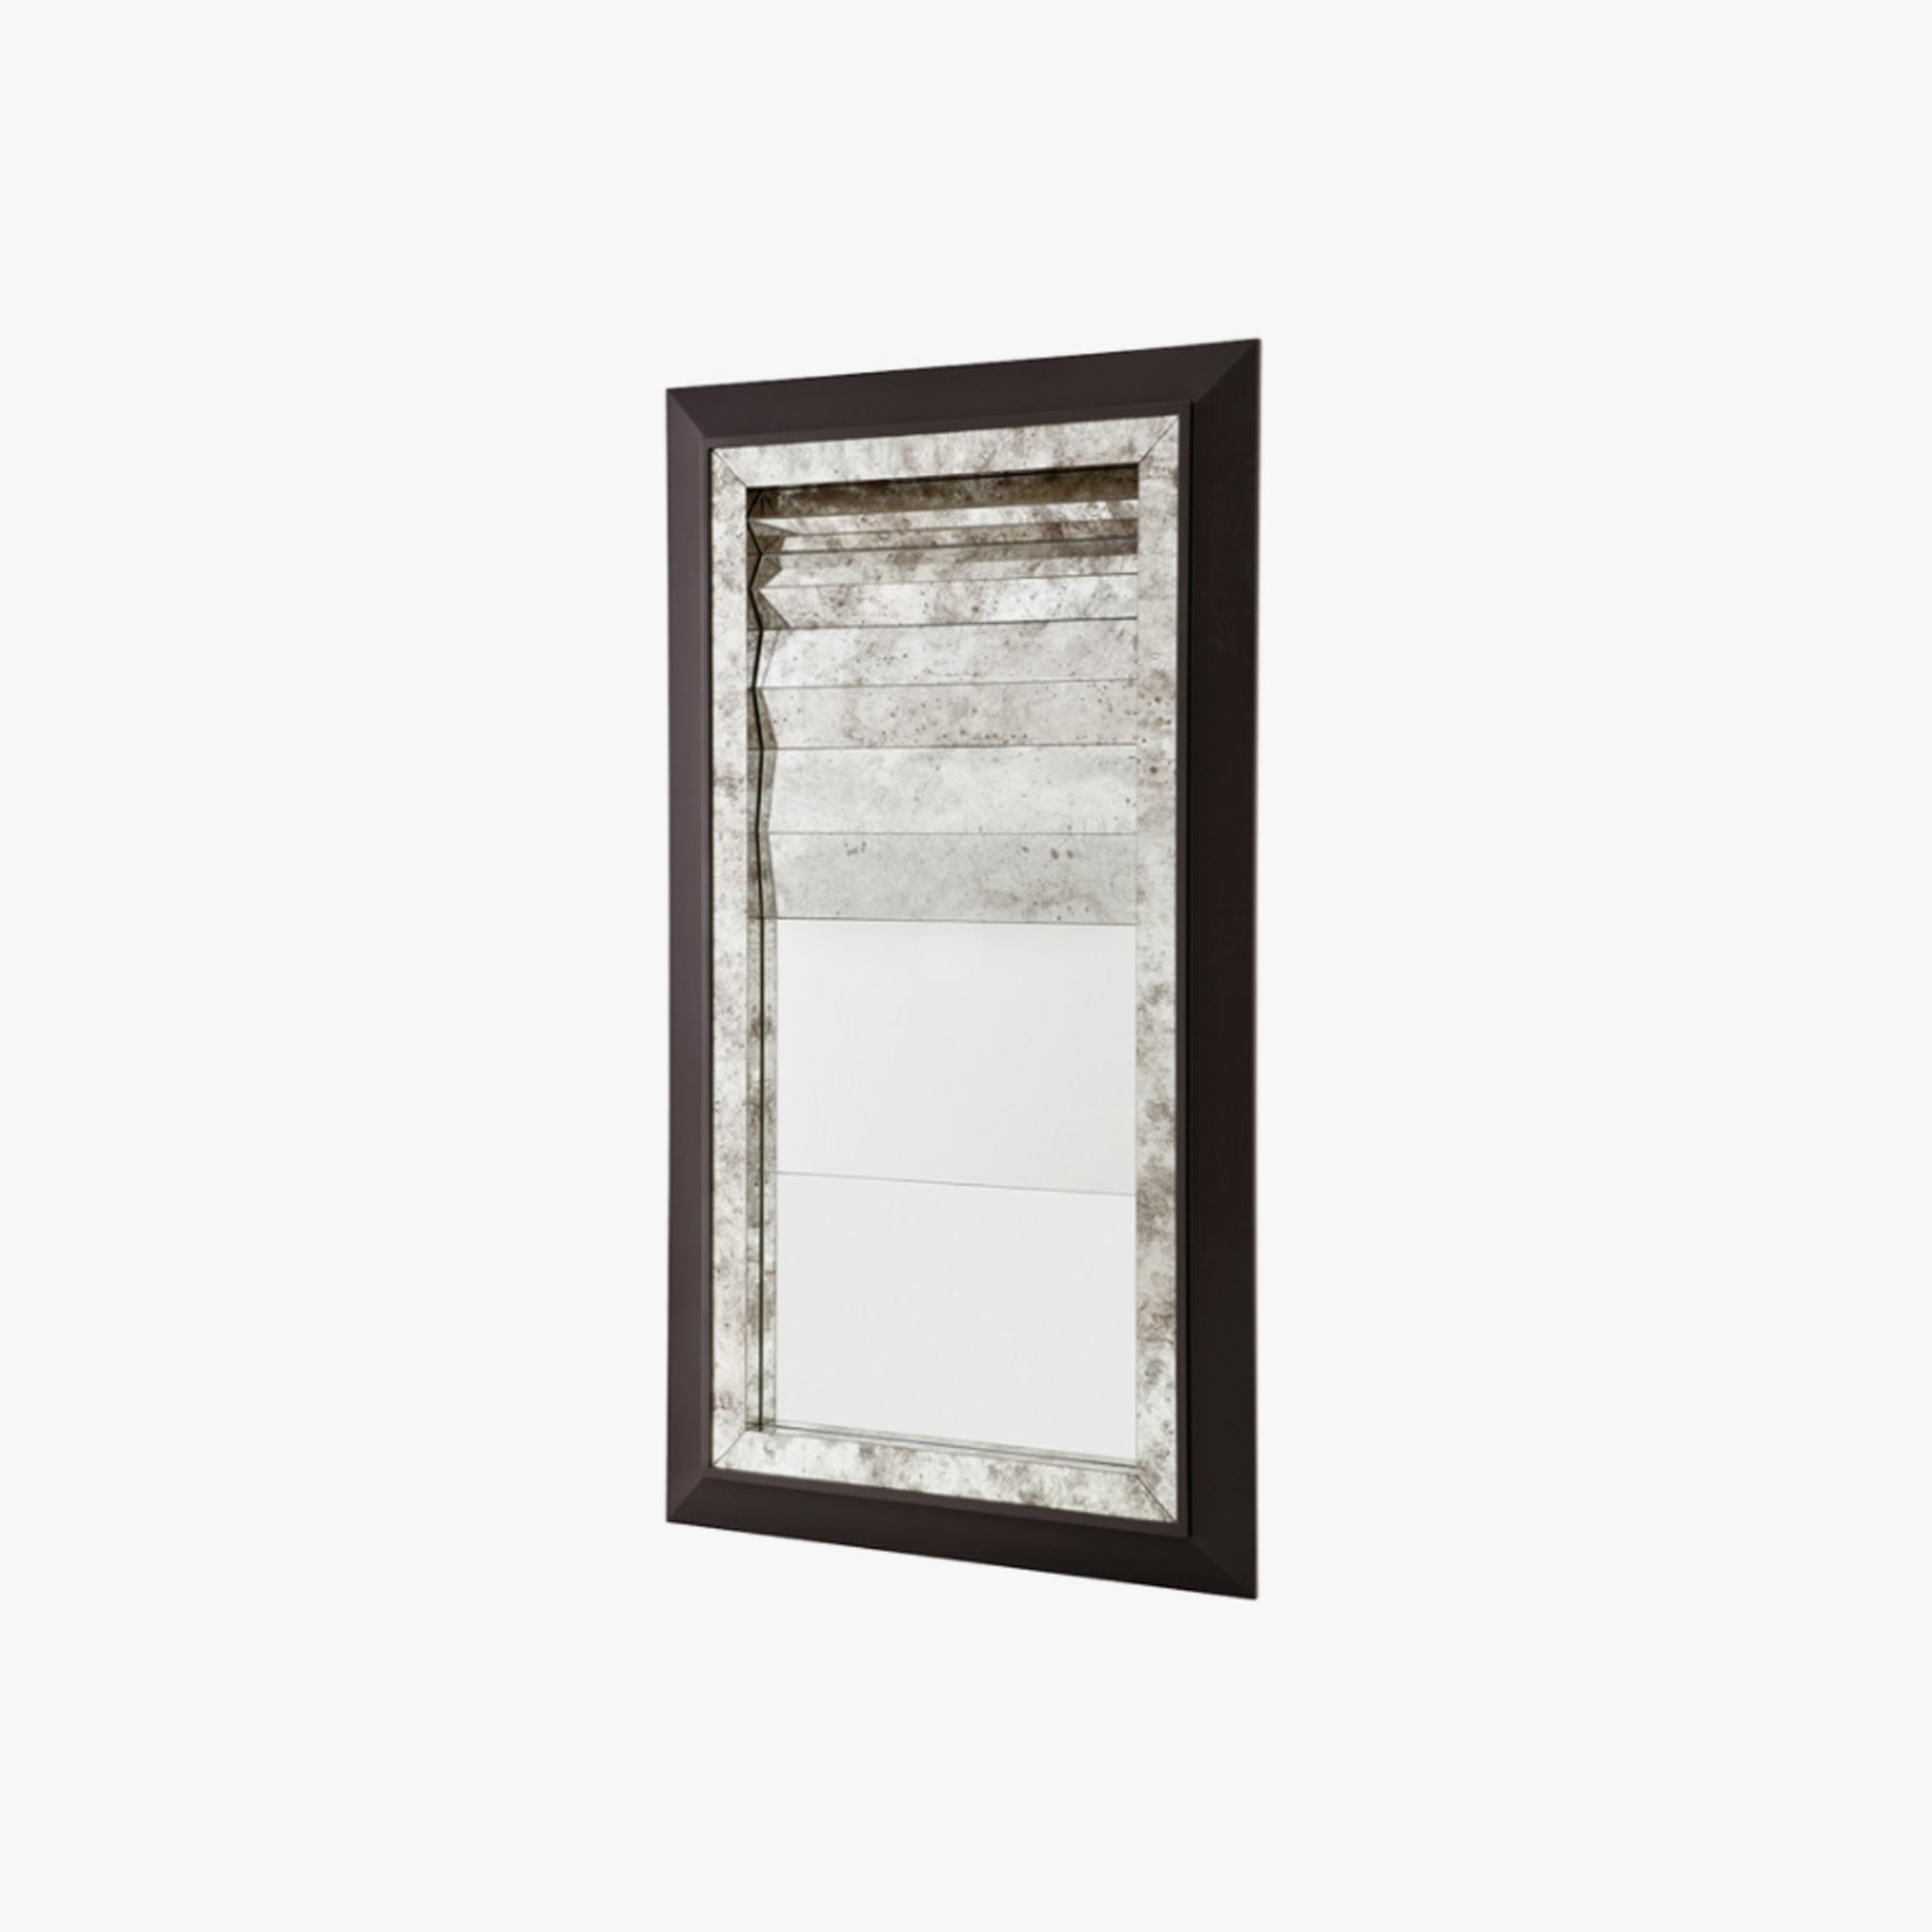 CONCERTINA MIRROR by Powell & Bonnell | South Hill Home